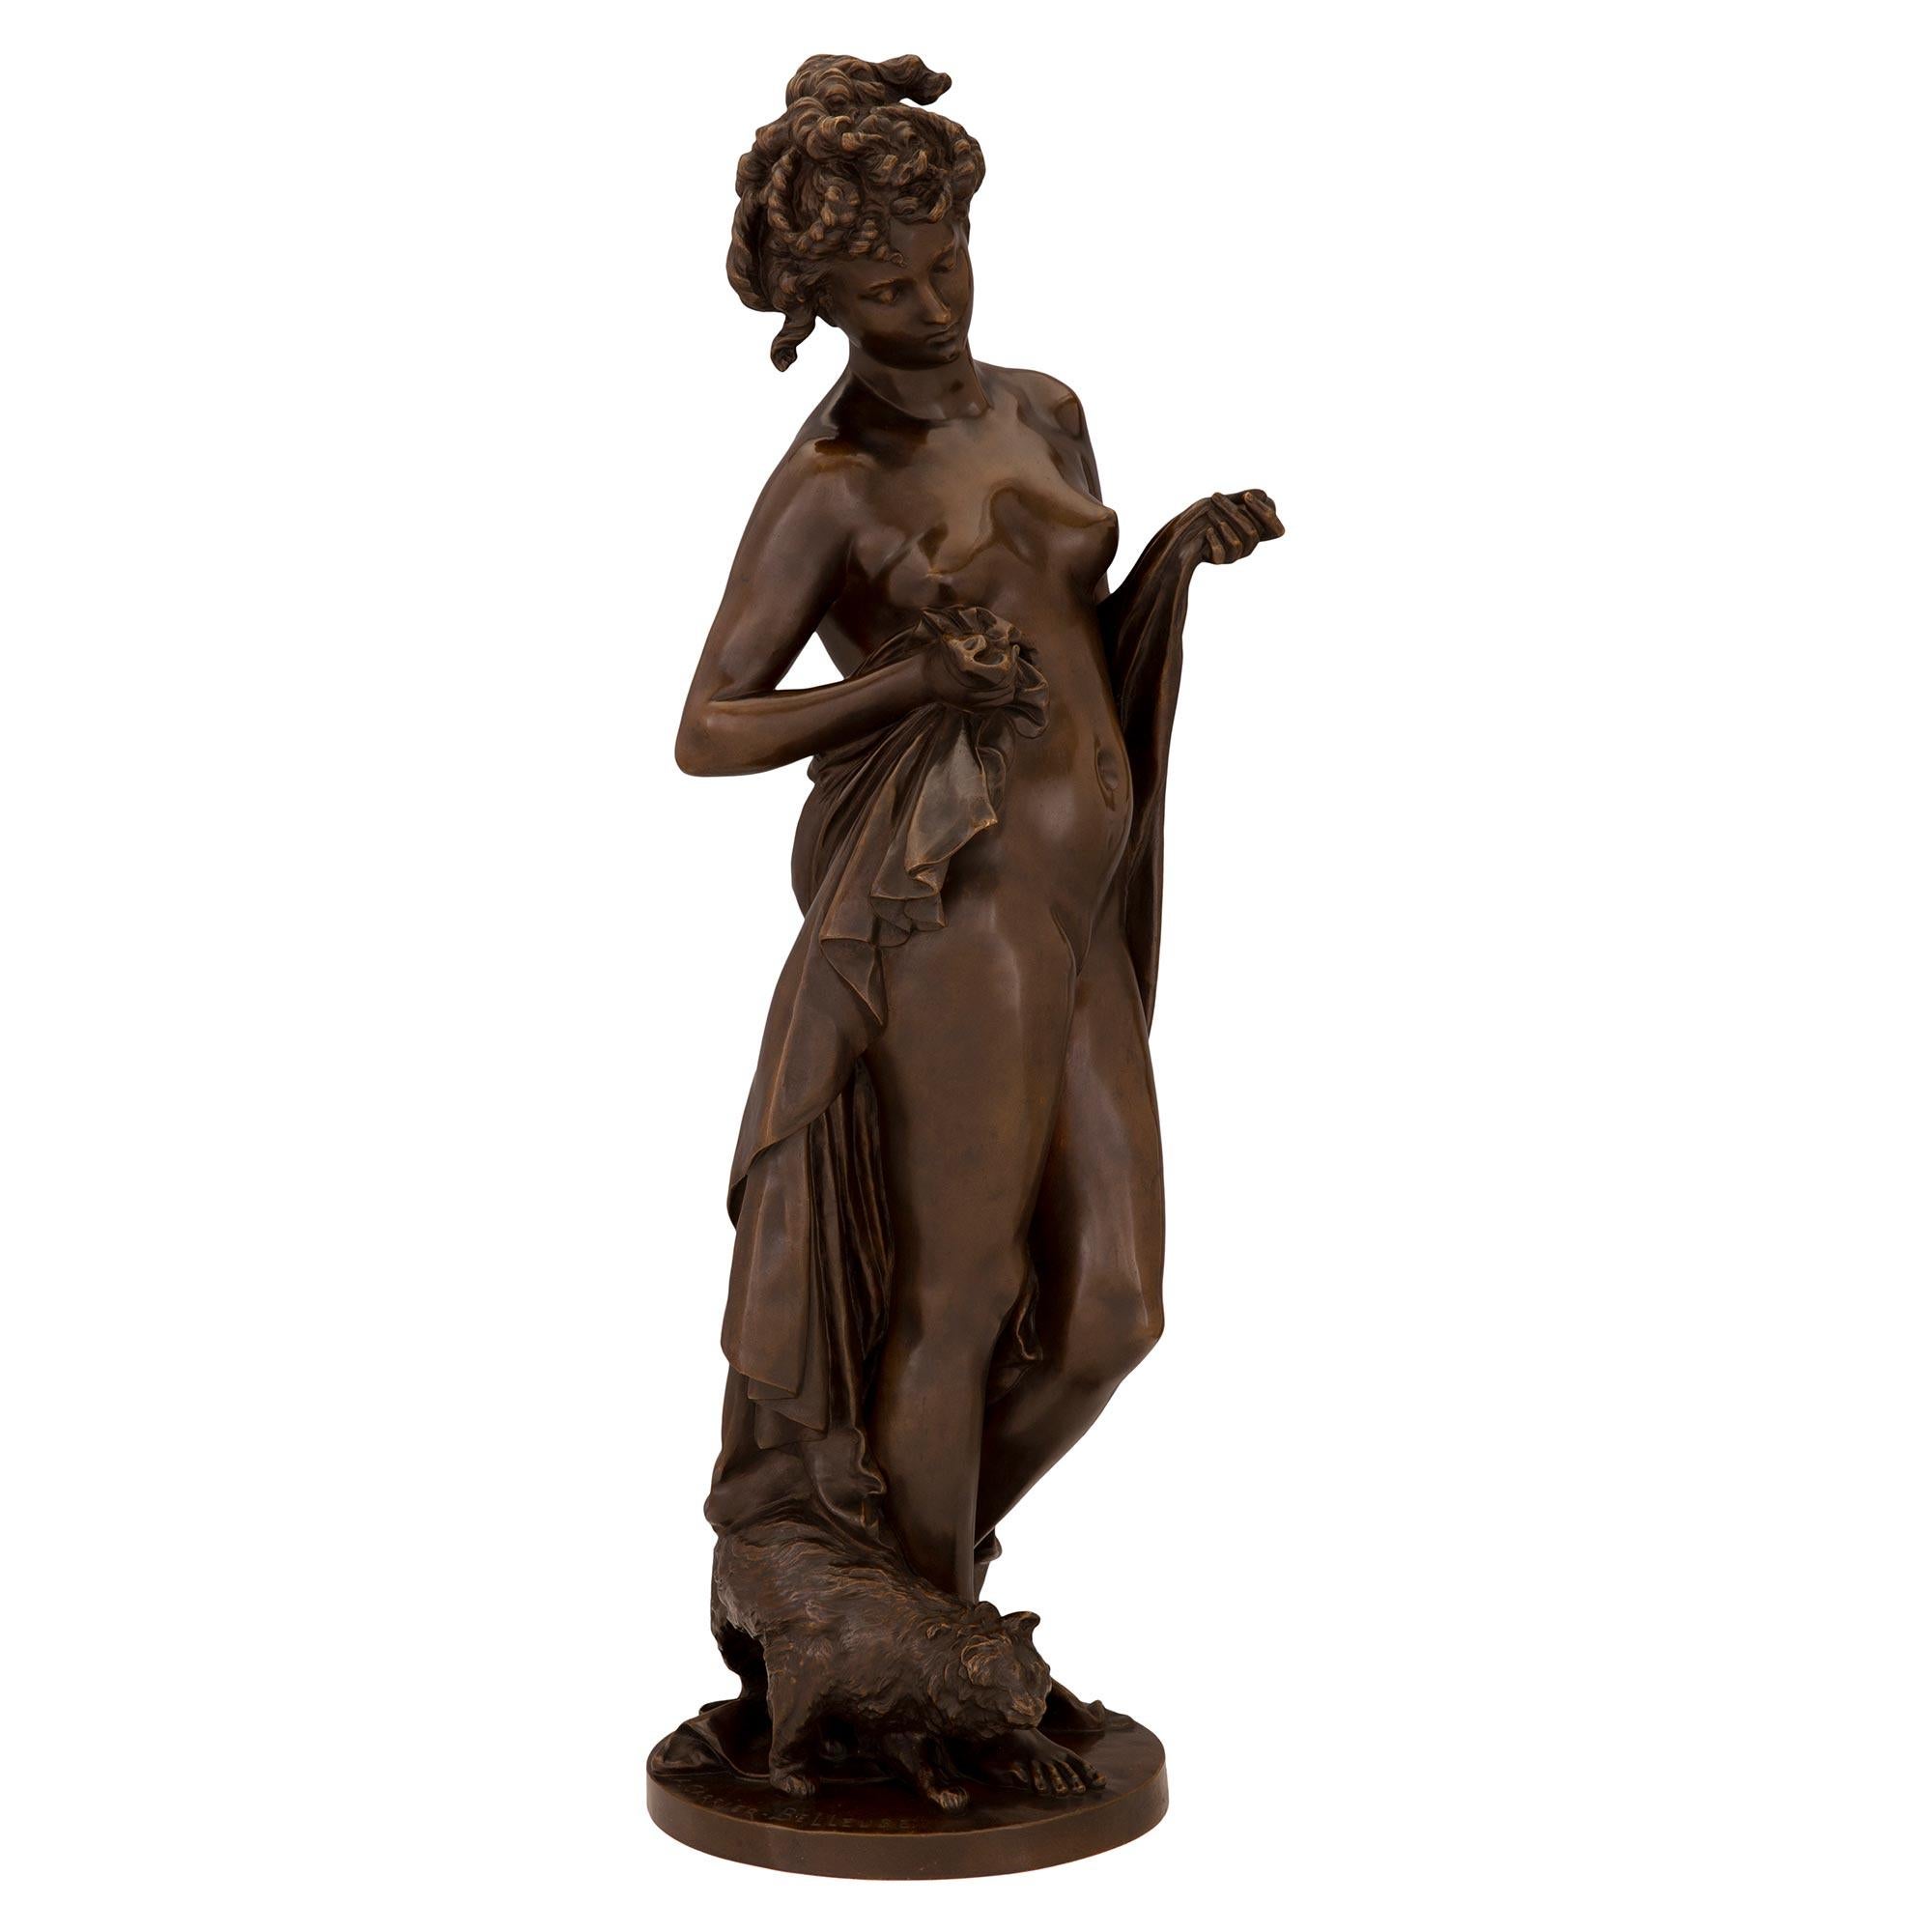 An impressive and high quality French 19th century Louis XVI st. patinated bronze statue, signed A. Carrier Belleuse. The statue is raised by a circular base with a ground like design where the signature is displayed. Above is the beautiful maiden